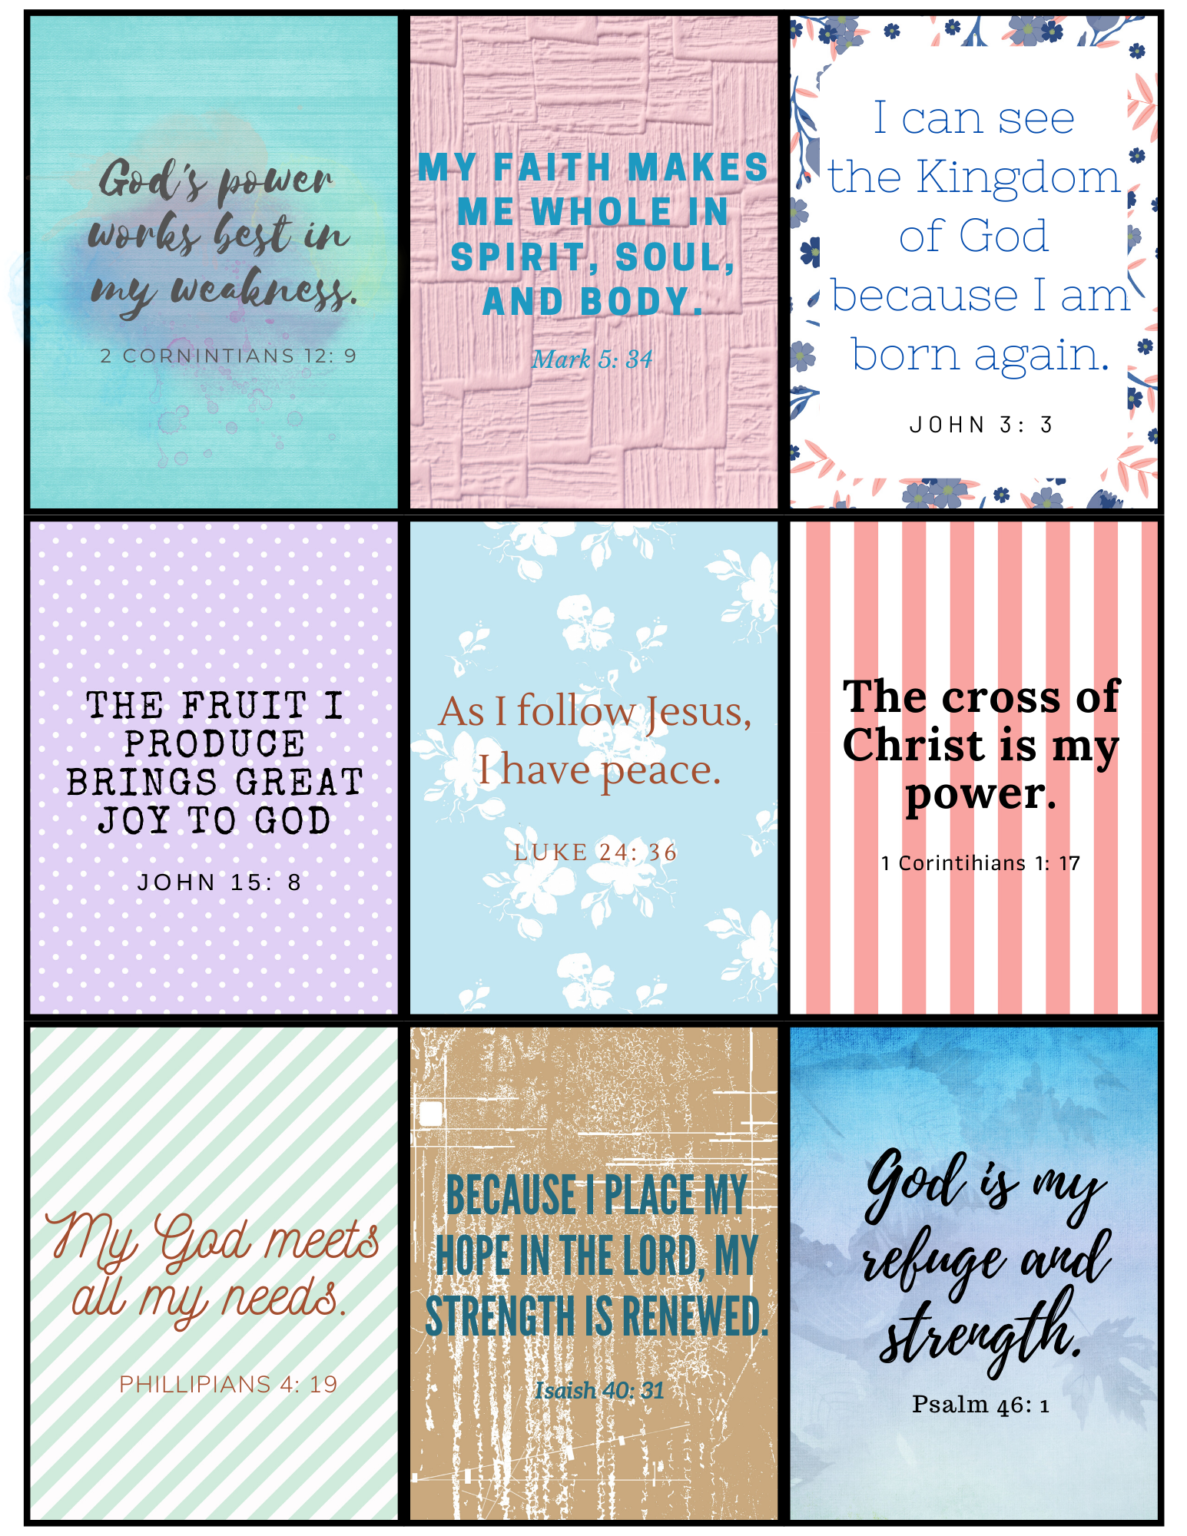 18-christian-affirmations-with-free-printable-cards